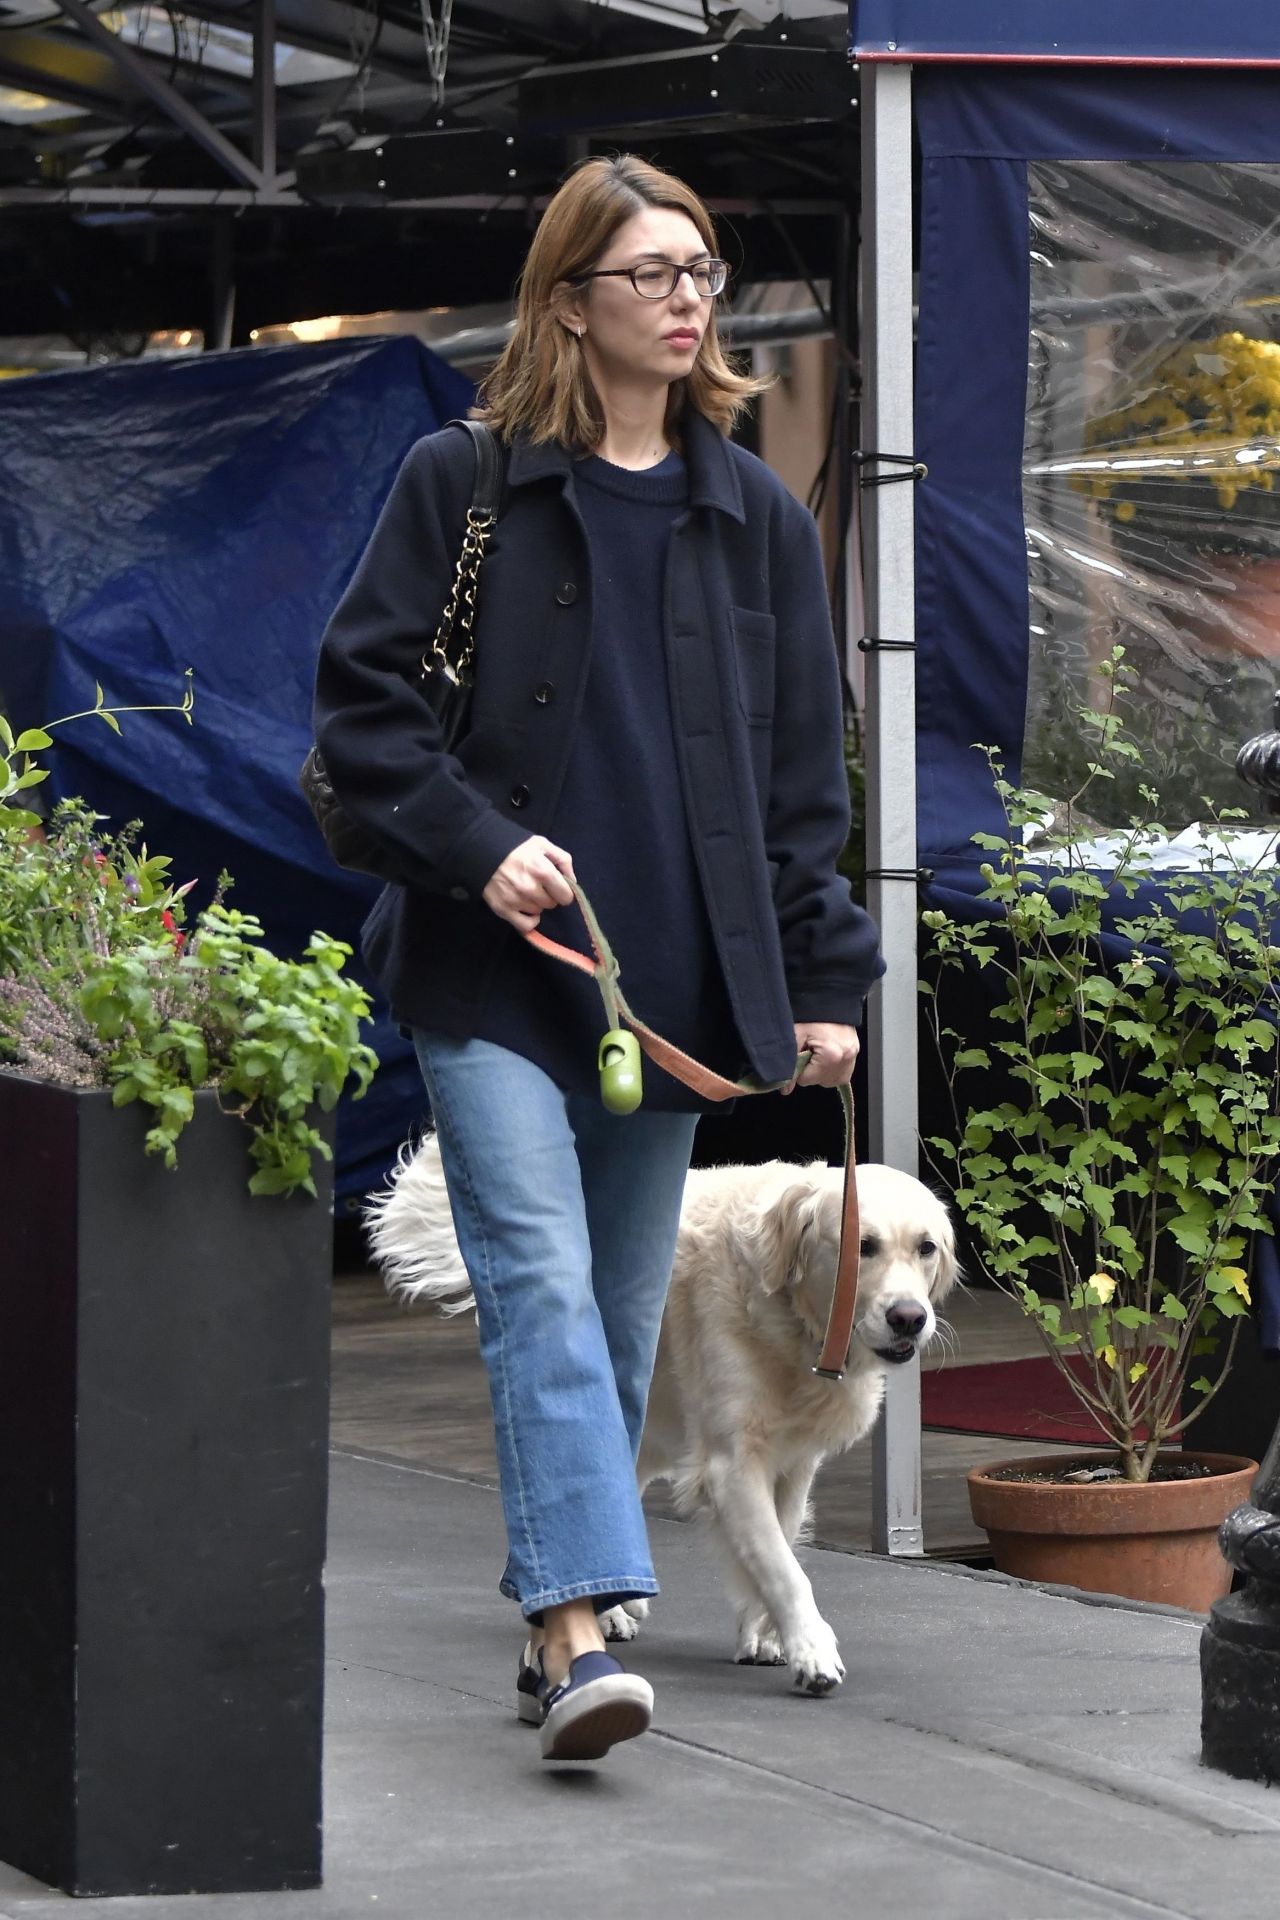 Pin by Heather DeBusk on SC Style in 2023  Sofia coppola style, Sneakers  looks, Sofia coppola